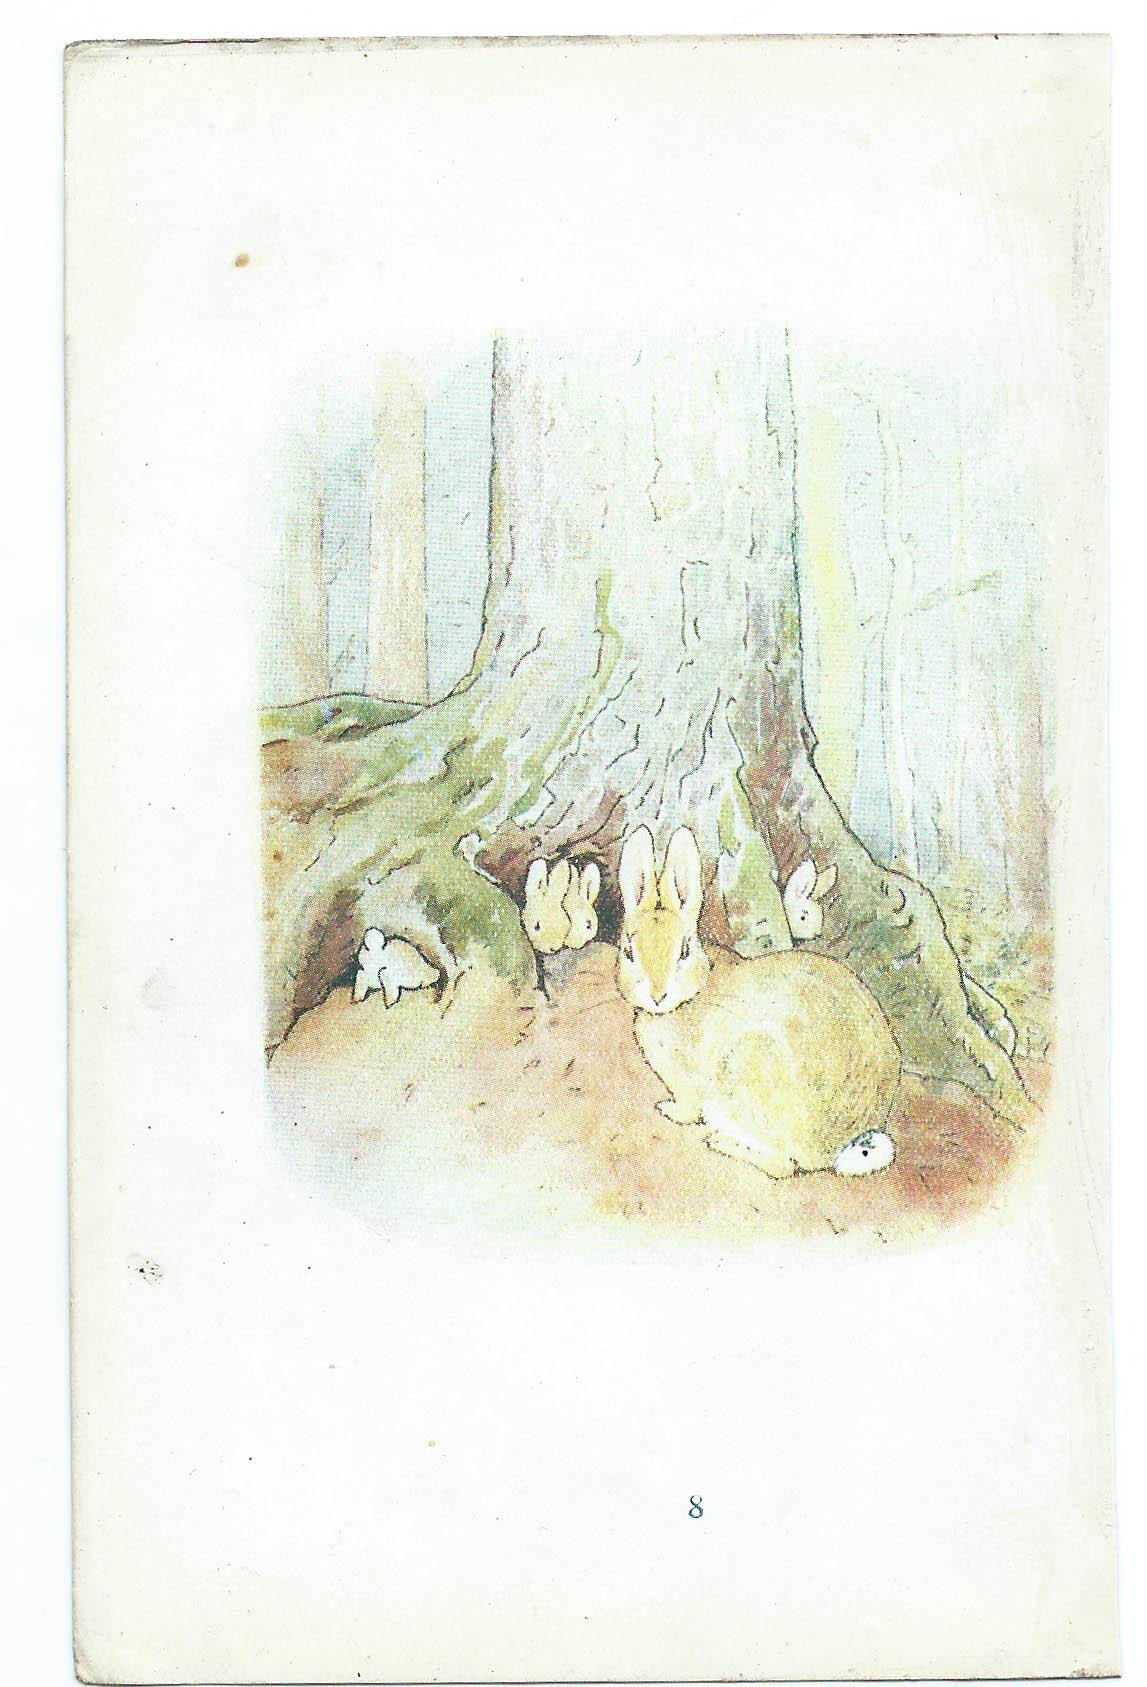 Lovely image by Beatrix Potter

Rescued from an early edition of 